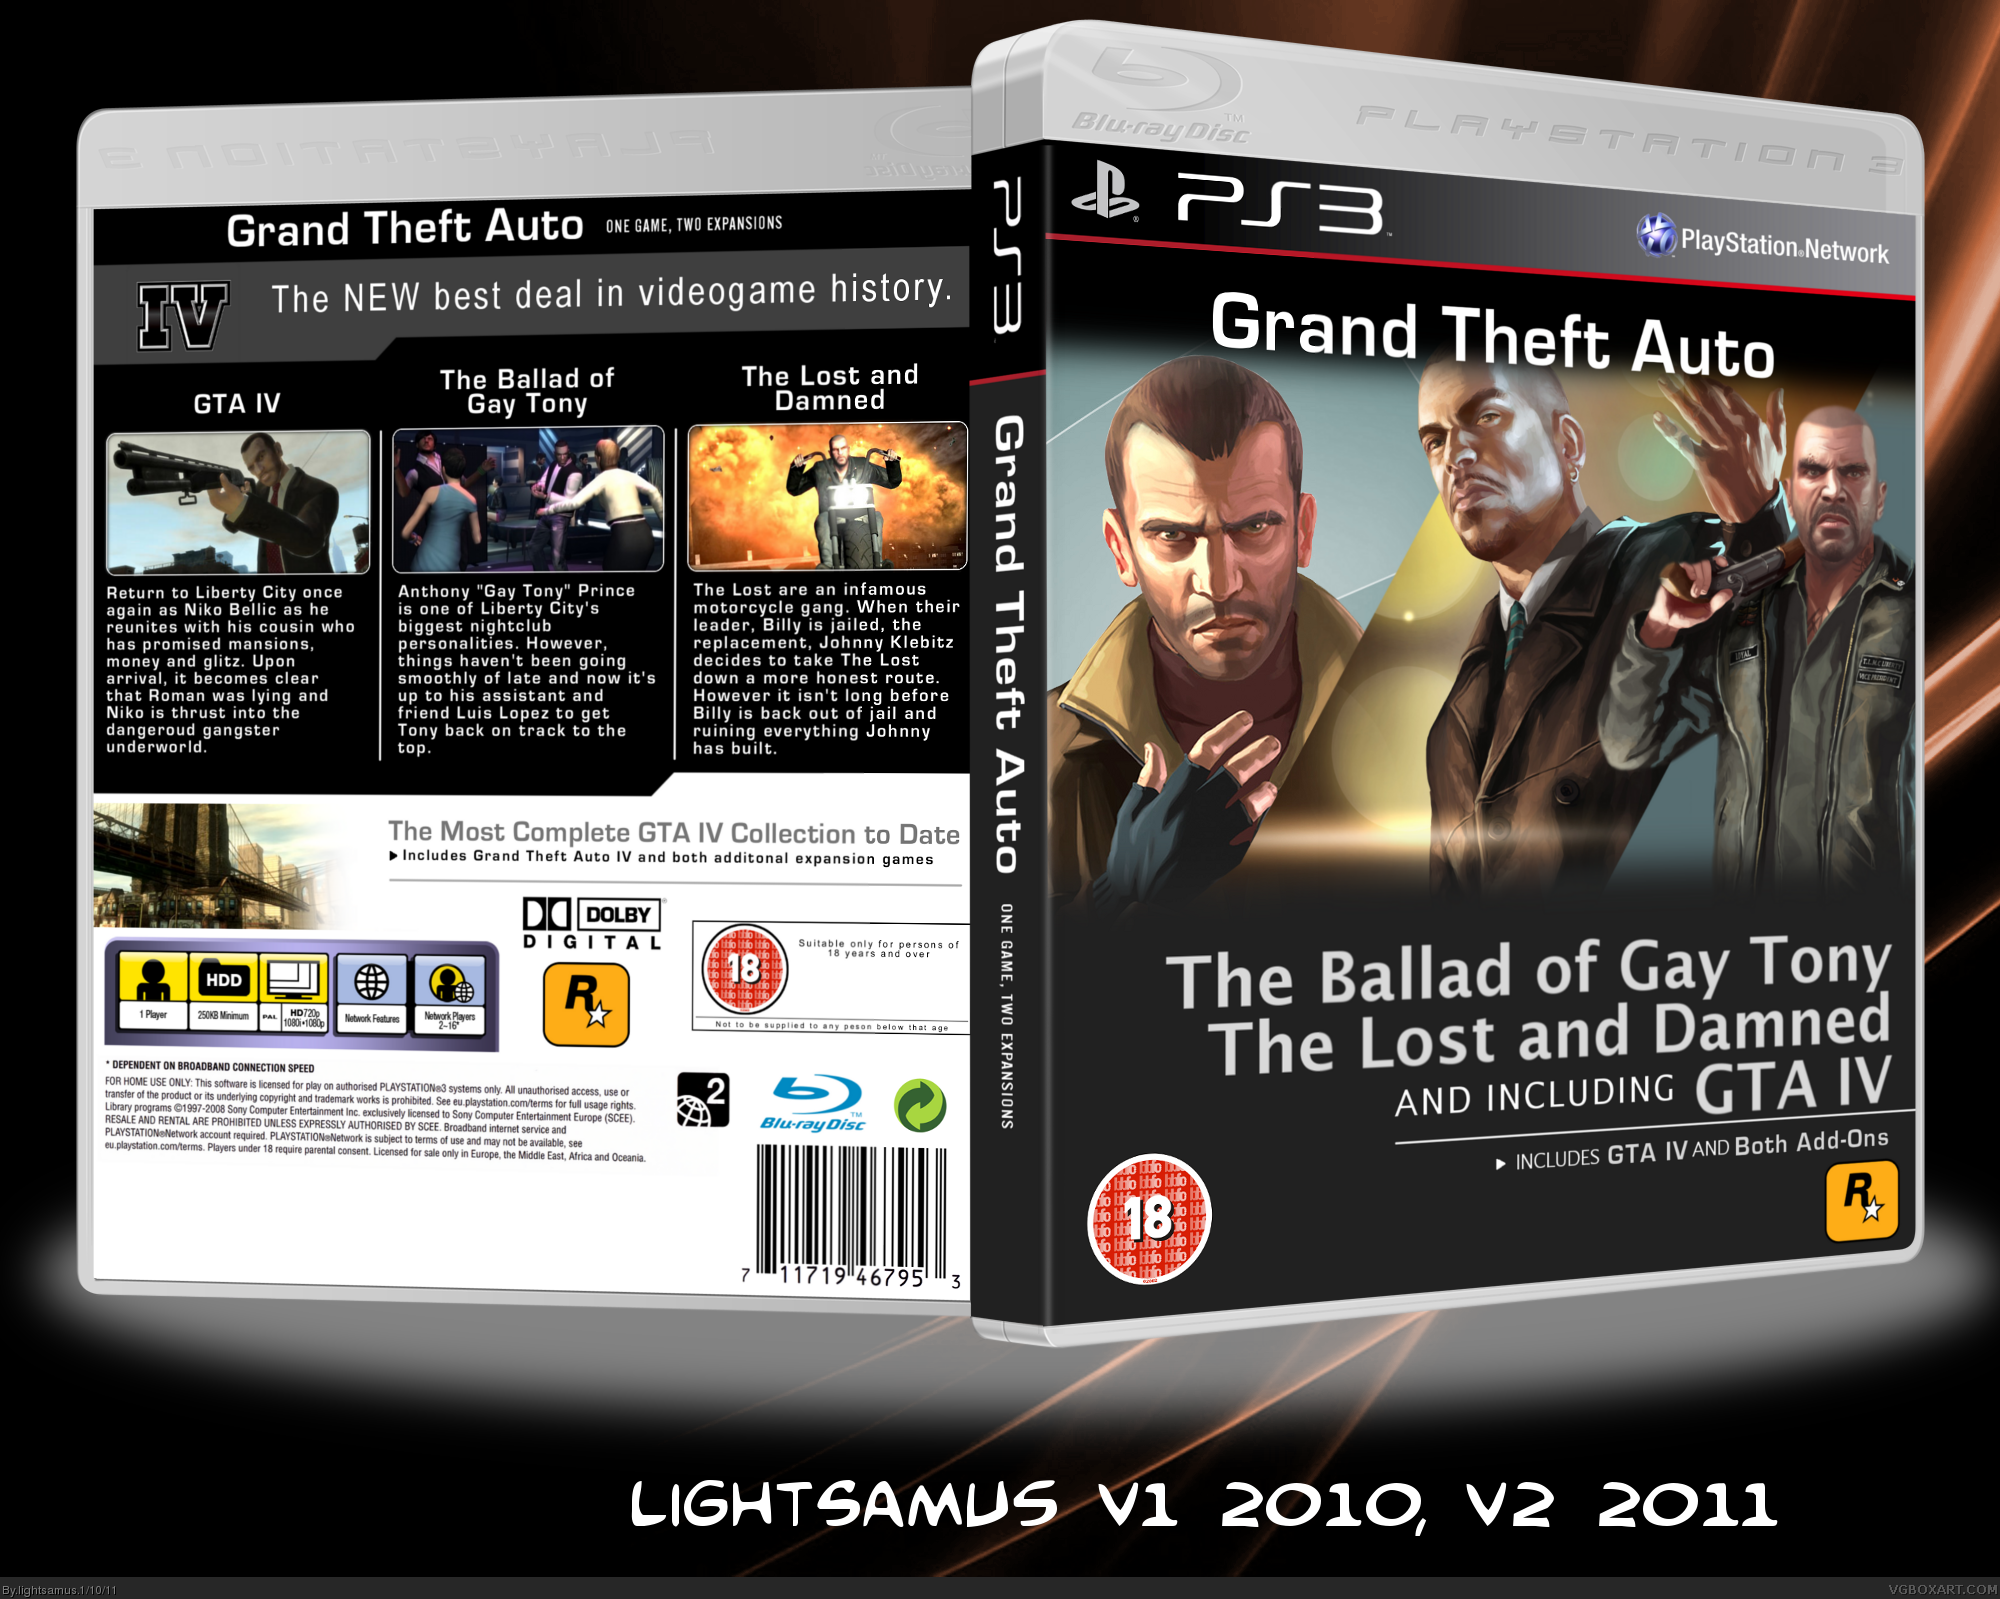 Grand Theft Auto: Episodes From Liberty City box cover